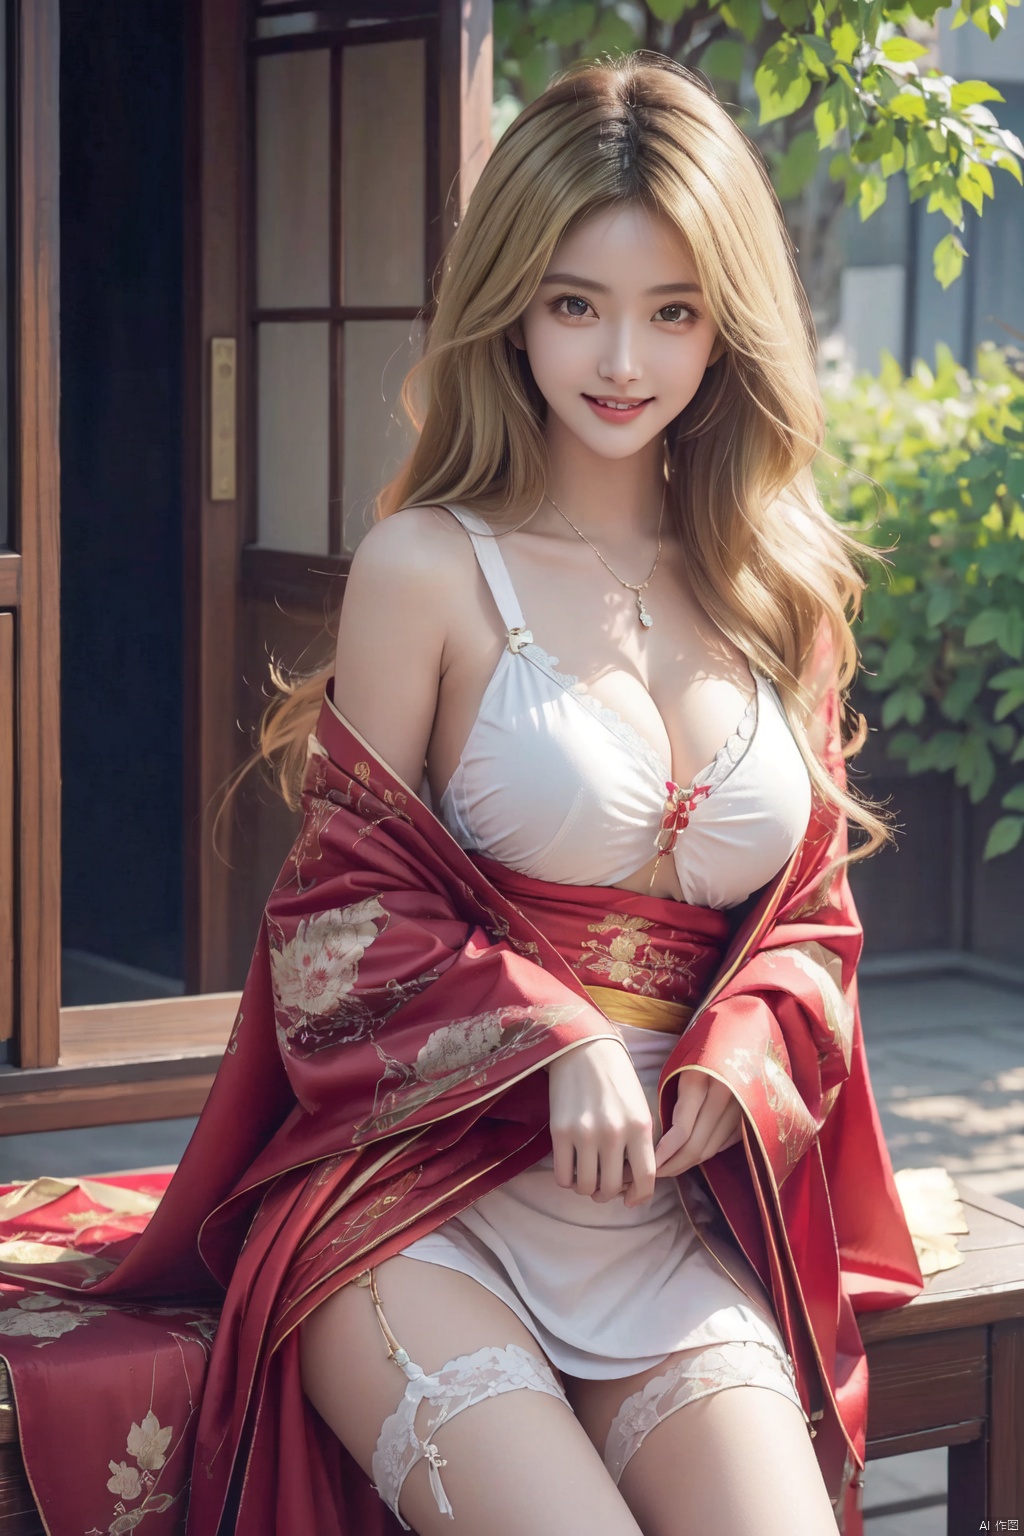 No underwear, smile, teeth white and neat,large chest, breast burst. Outdoor,cleavage, ((((multiple girls)))), (Good structure), (high definition: 1.2), (HD: 1.2),
, (ultra resolution: 1.0), (4K: 1.0)
, (photorealistic: 1.0), (realistic: 1.0),
, (professional photography: 1.0), (DSLR quality: 1.0),
, (detailed: 1.0), (sharp focus: 1.0),
, (masterpiece: 1.2), (epic shot: 1.2),
anatomically-precise-finger-details,
, Cinematic,
, Natural lighting,Wind, flowing hair, kind smile, , pose for picture, Dynamic pose, Winning works in photography competitions, a detailed wallpaper, a screenshot, gorgeous colors, lovely and beautiful, grand scenes, epic composition, realism, personalized depiction, Octane rendering, masterpiece, real texture, smooth skin, ray tracing, real light, blackpantyhose, wangyushan, natural breasts, Missionary pov,wangzuxian, skirt lift, Lying bustup shot, blonde hair, chineseclothes,dress